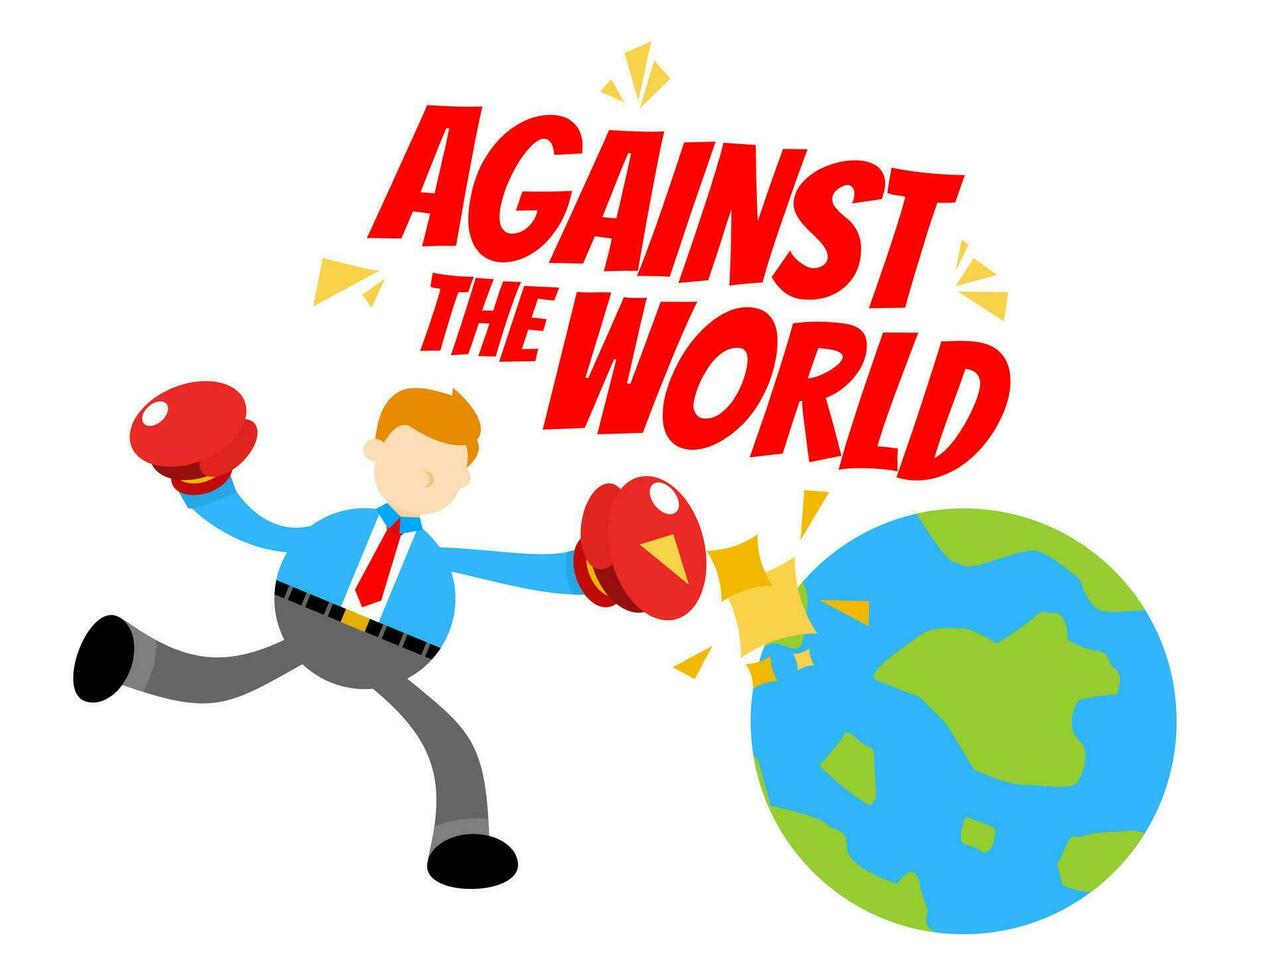 man against punch the world cartoon doodle flat design style vector illustration